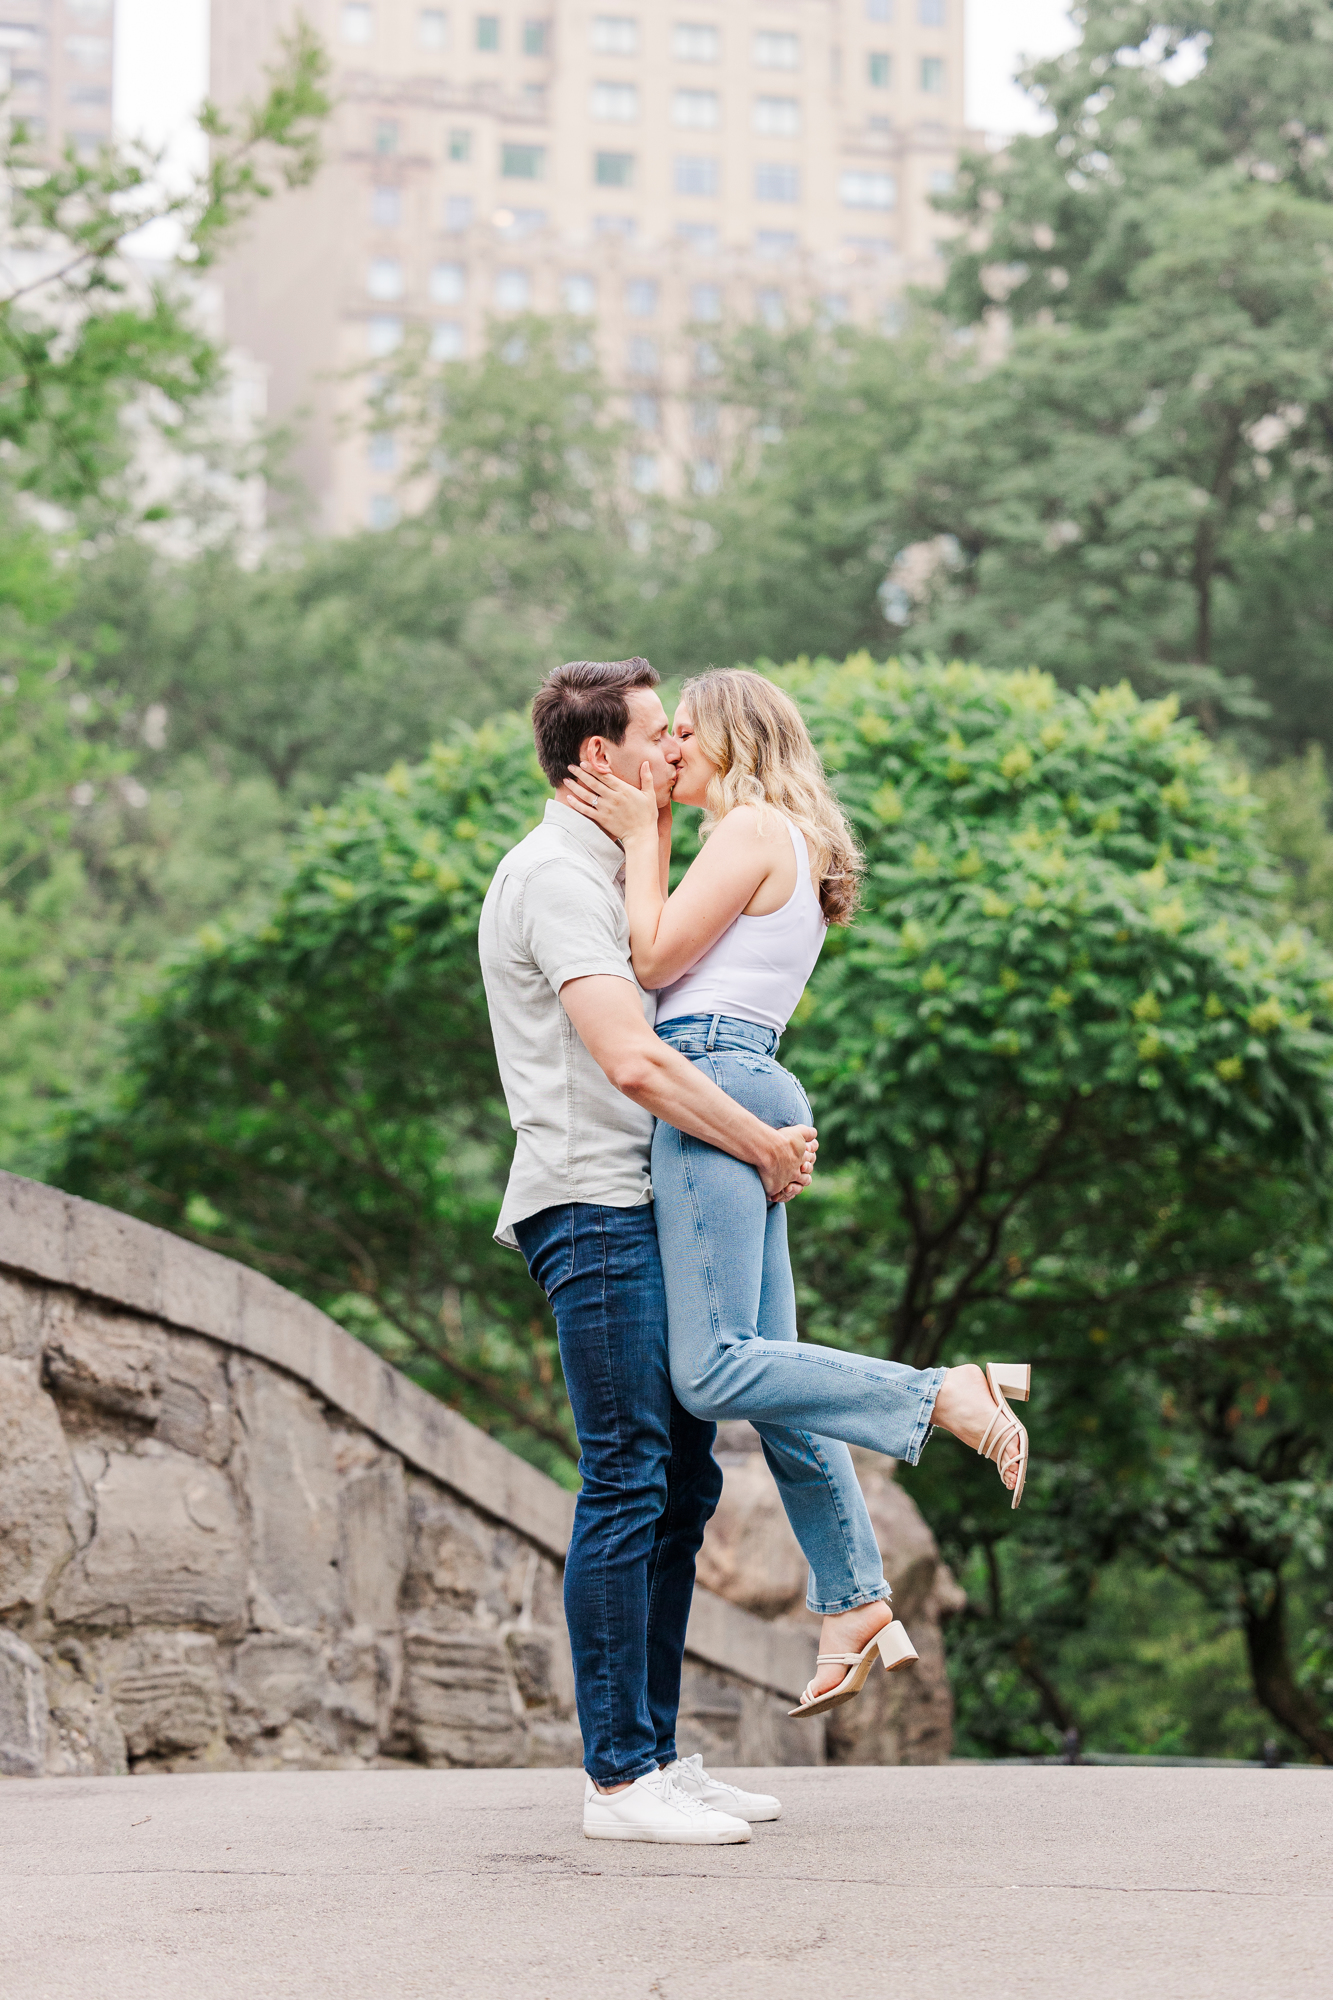 Romantic Engagement Session in Central Park